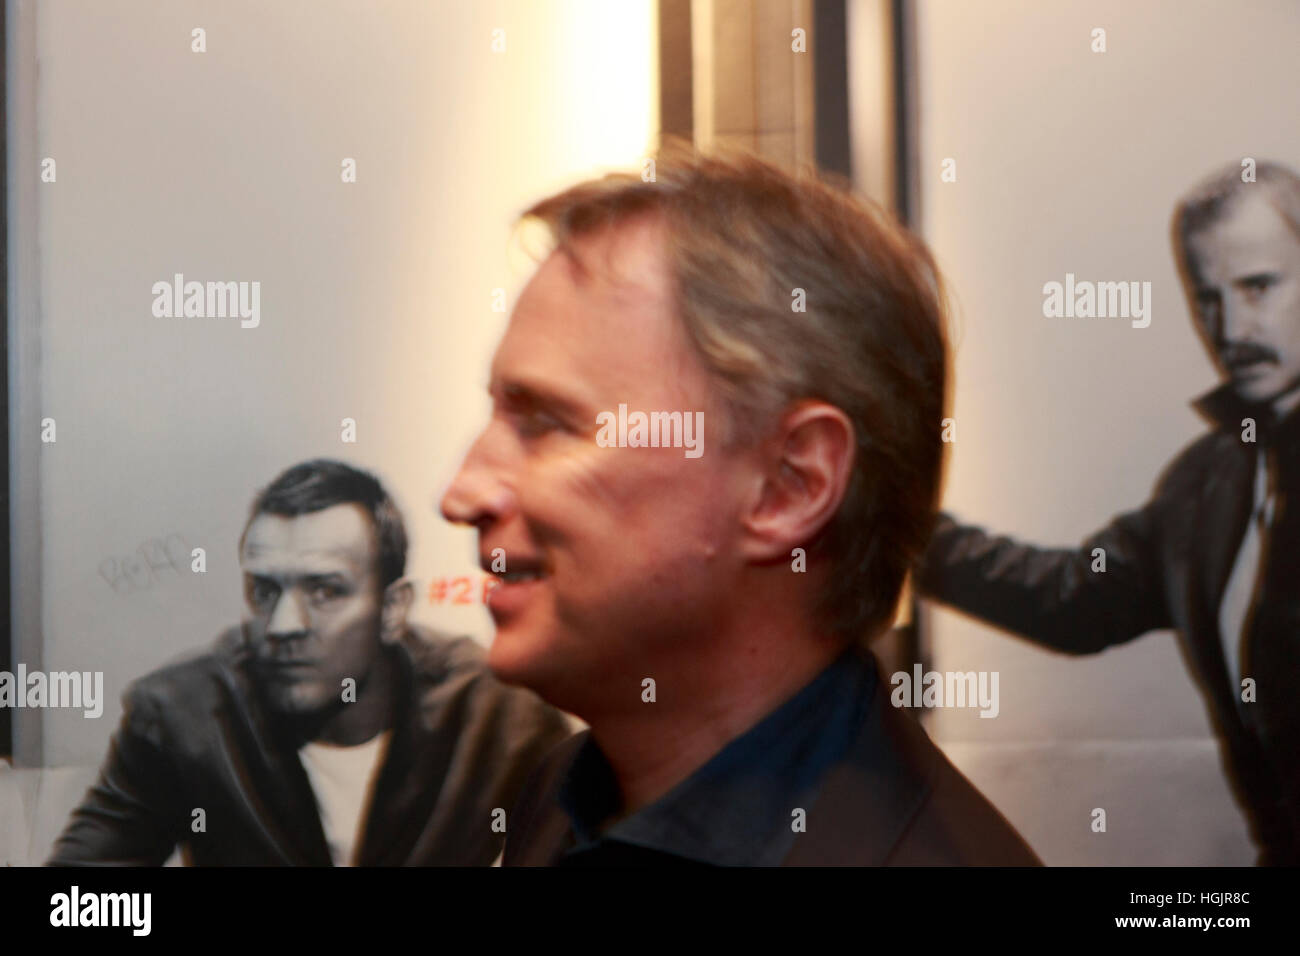 Edinburgh, UK. 22nd January, 2017. T2 Trainspotting premiere at Edinburgh Cineworld. Artist picture where the background is formed for two member of the T2 Transpotting (Ewan McGregor and Robert Carlyle) looking to Robert Carlyle who is walking. Stock Photo